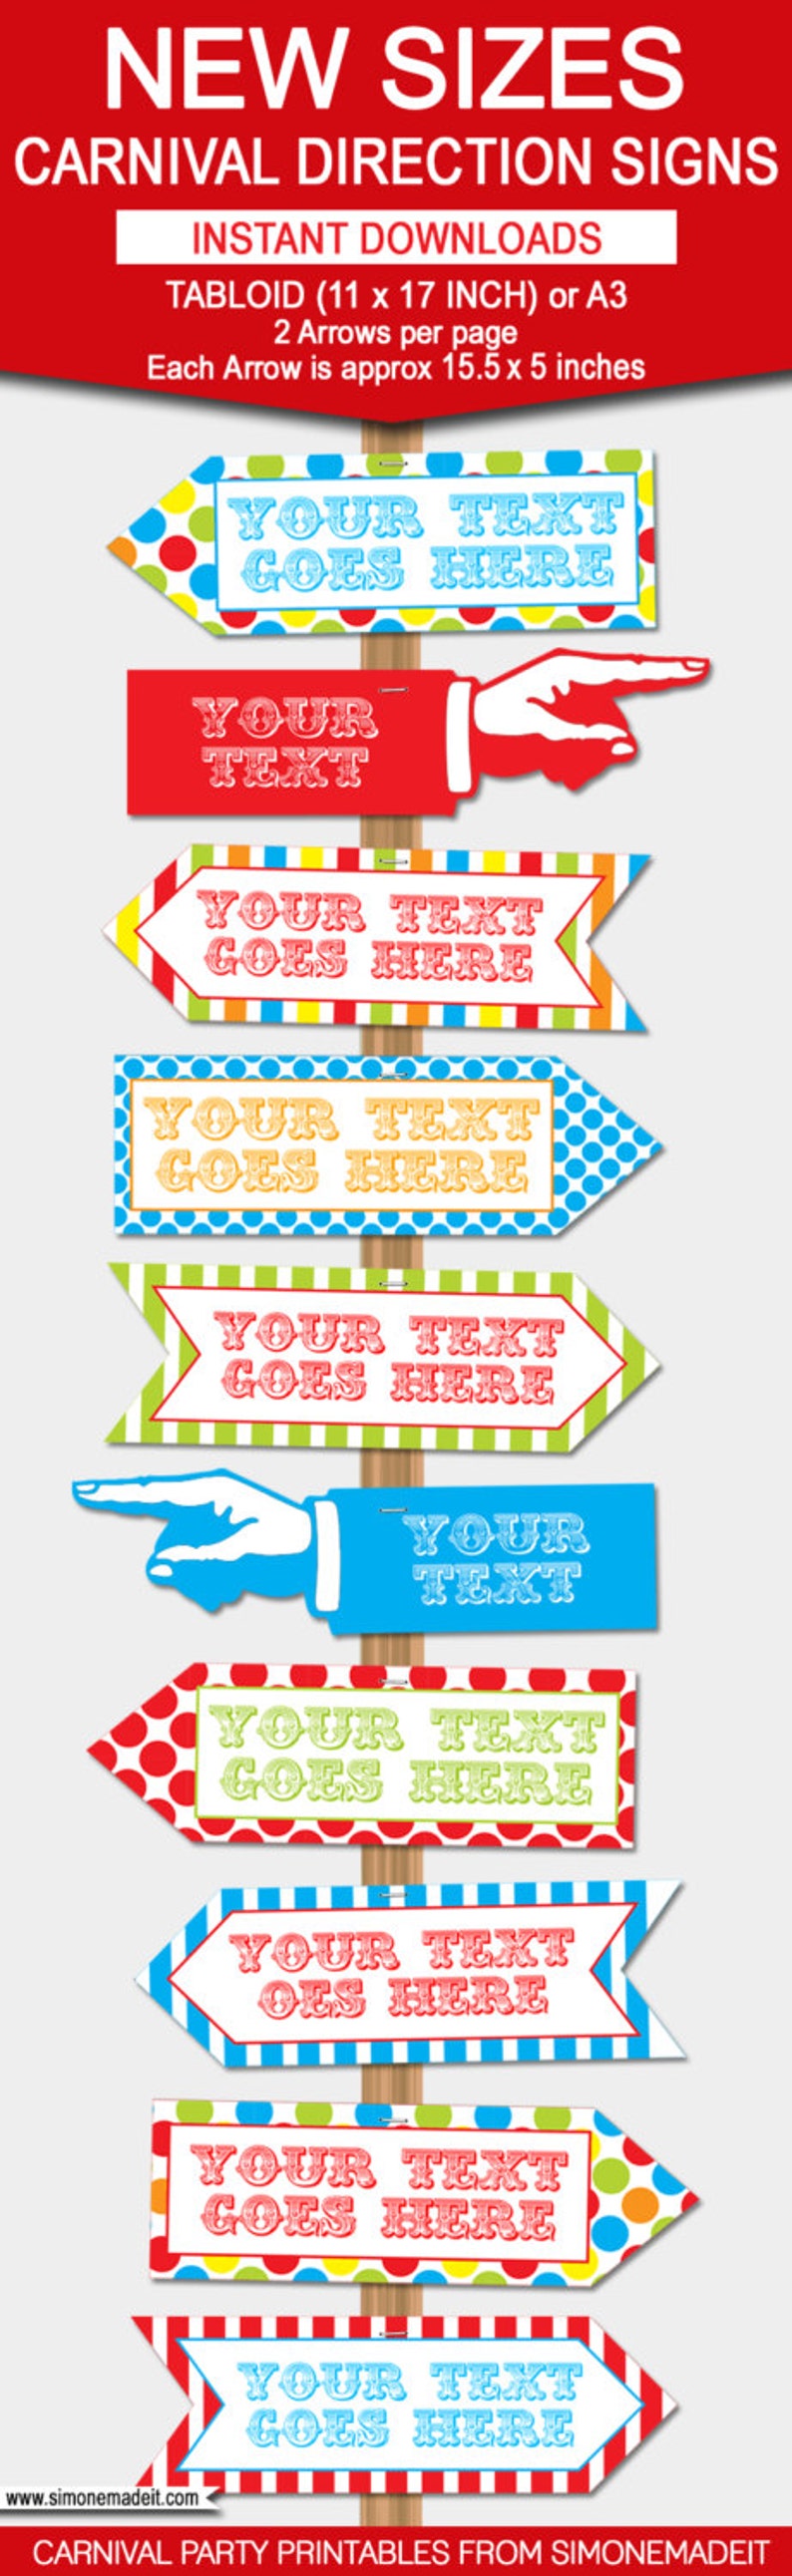 Carnival Signs Direction Arrows - Printable Carnival Party Decorations Game Signs - Circus Theme - INSTANT DOWNLOAD text EDITABLE Template - 11x17 inch, 8.5x11 inch, A4 and A3 sizes